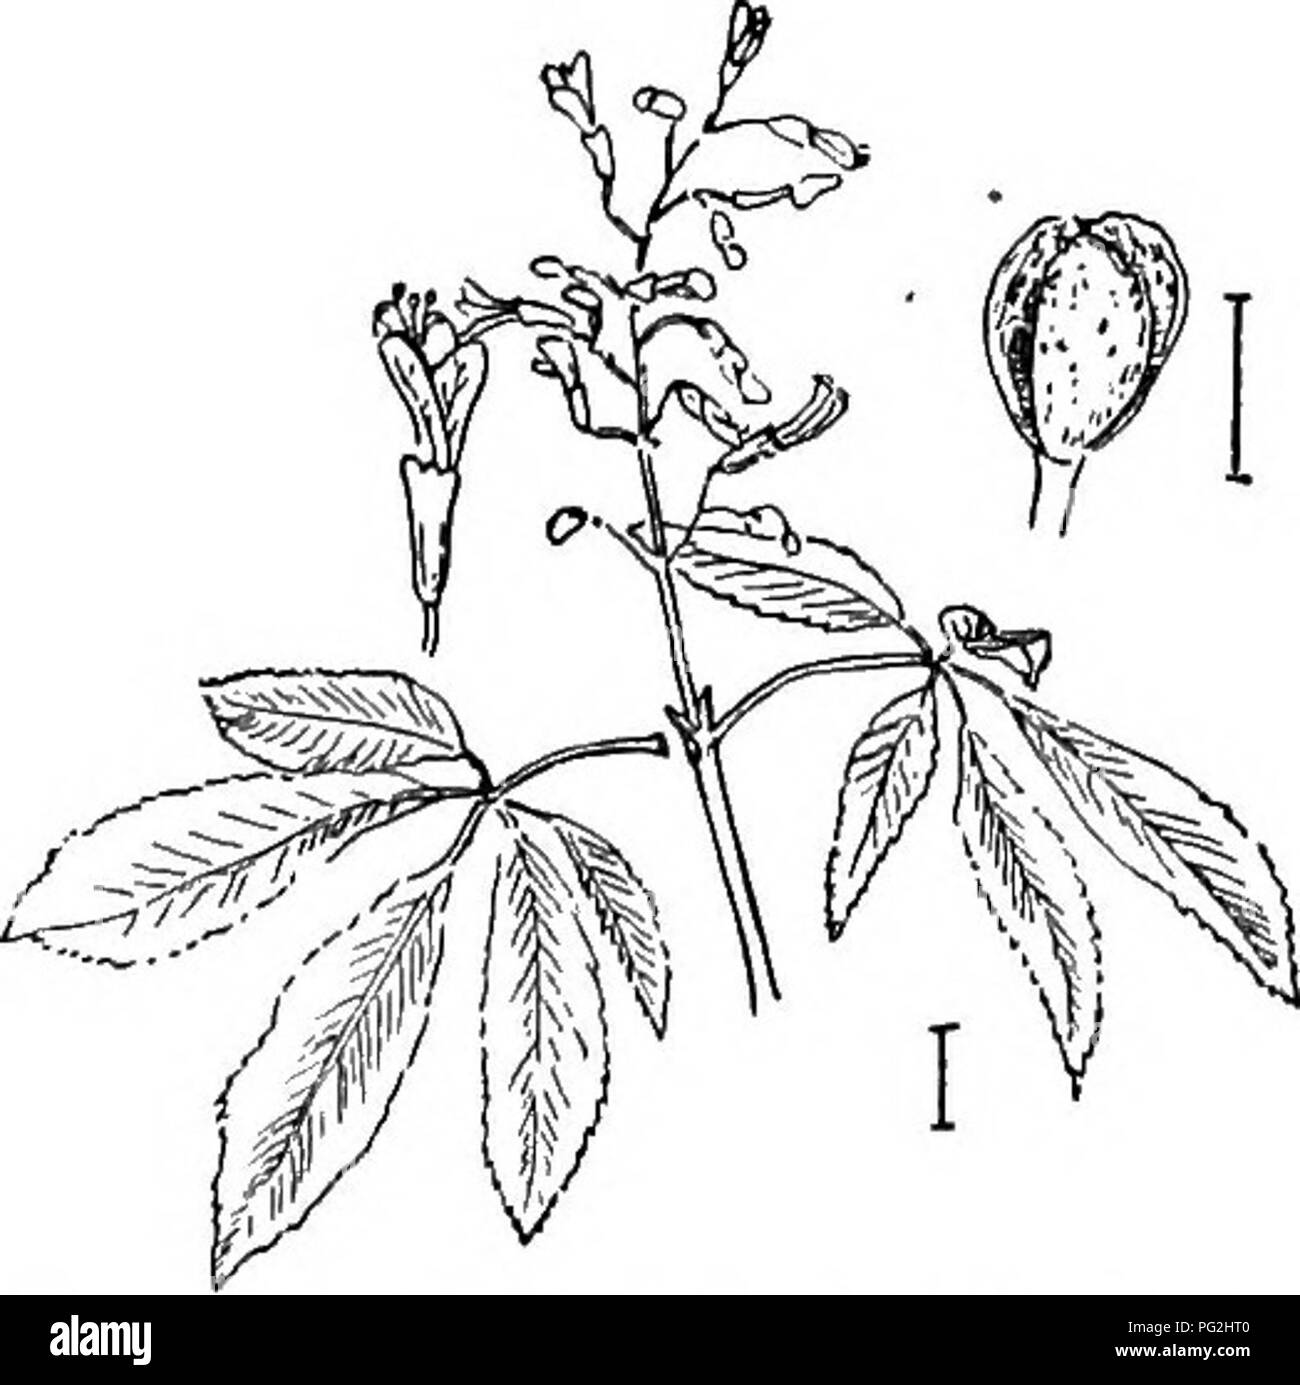 . Ornamental shrubs of the United States (hardy, cultivated). Shrubs. Fig. 99. — Chinese Flowering Chestnut. Fjg. 100. — Long-racemed Horse- chestnut. Common Jujube — Zizyphus sativa — is a shrub or small tree, often prickly, growing occasionally to the height of 30 feet. The leaves are so arranged along slender green stems as to look like compound pinnate ones but the flowers and fruit in their axils prove the leaves are simple. These leaves are from 1 to 3 inches long, dark glossy-green above, whitish below, oblique at base and finely notched. The fruit is short-stalked, dark red to black, i Stock Photo